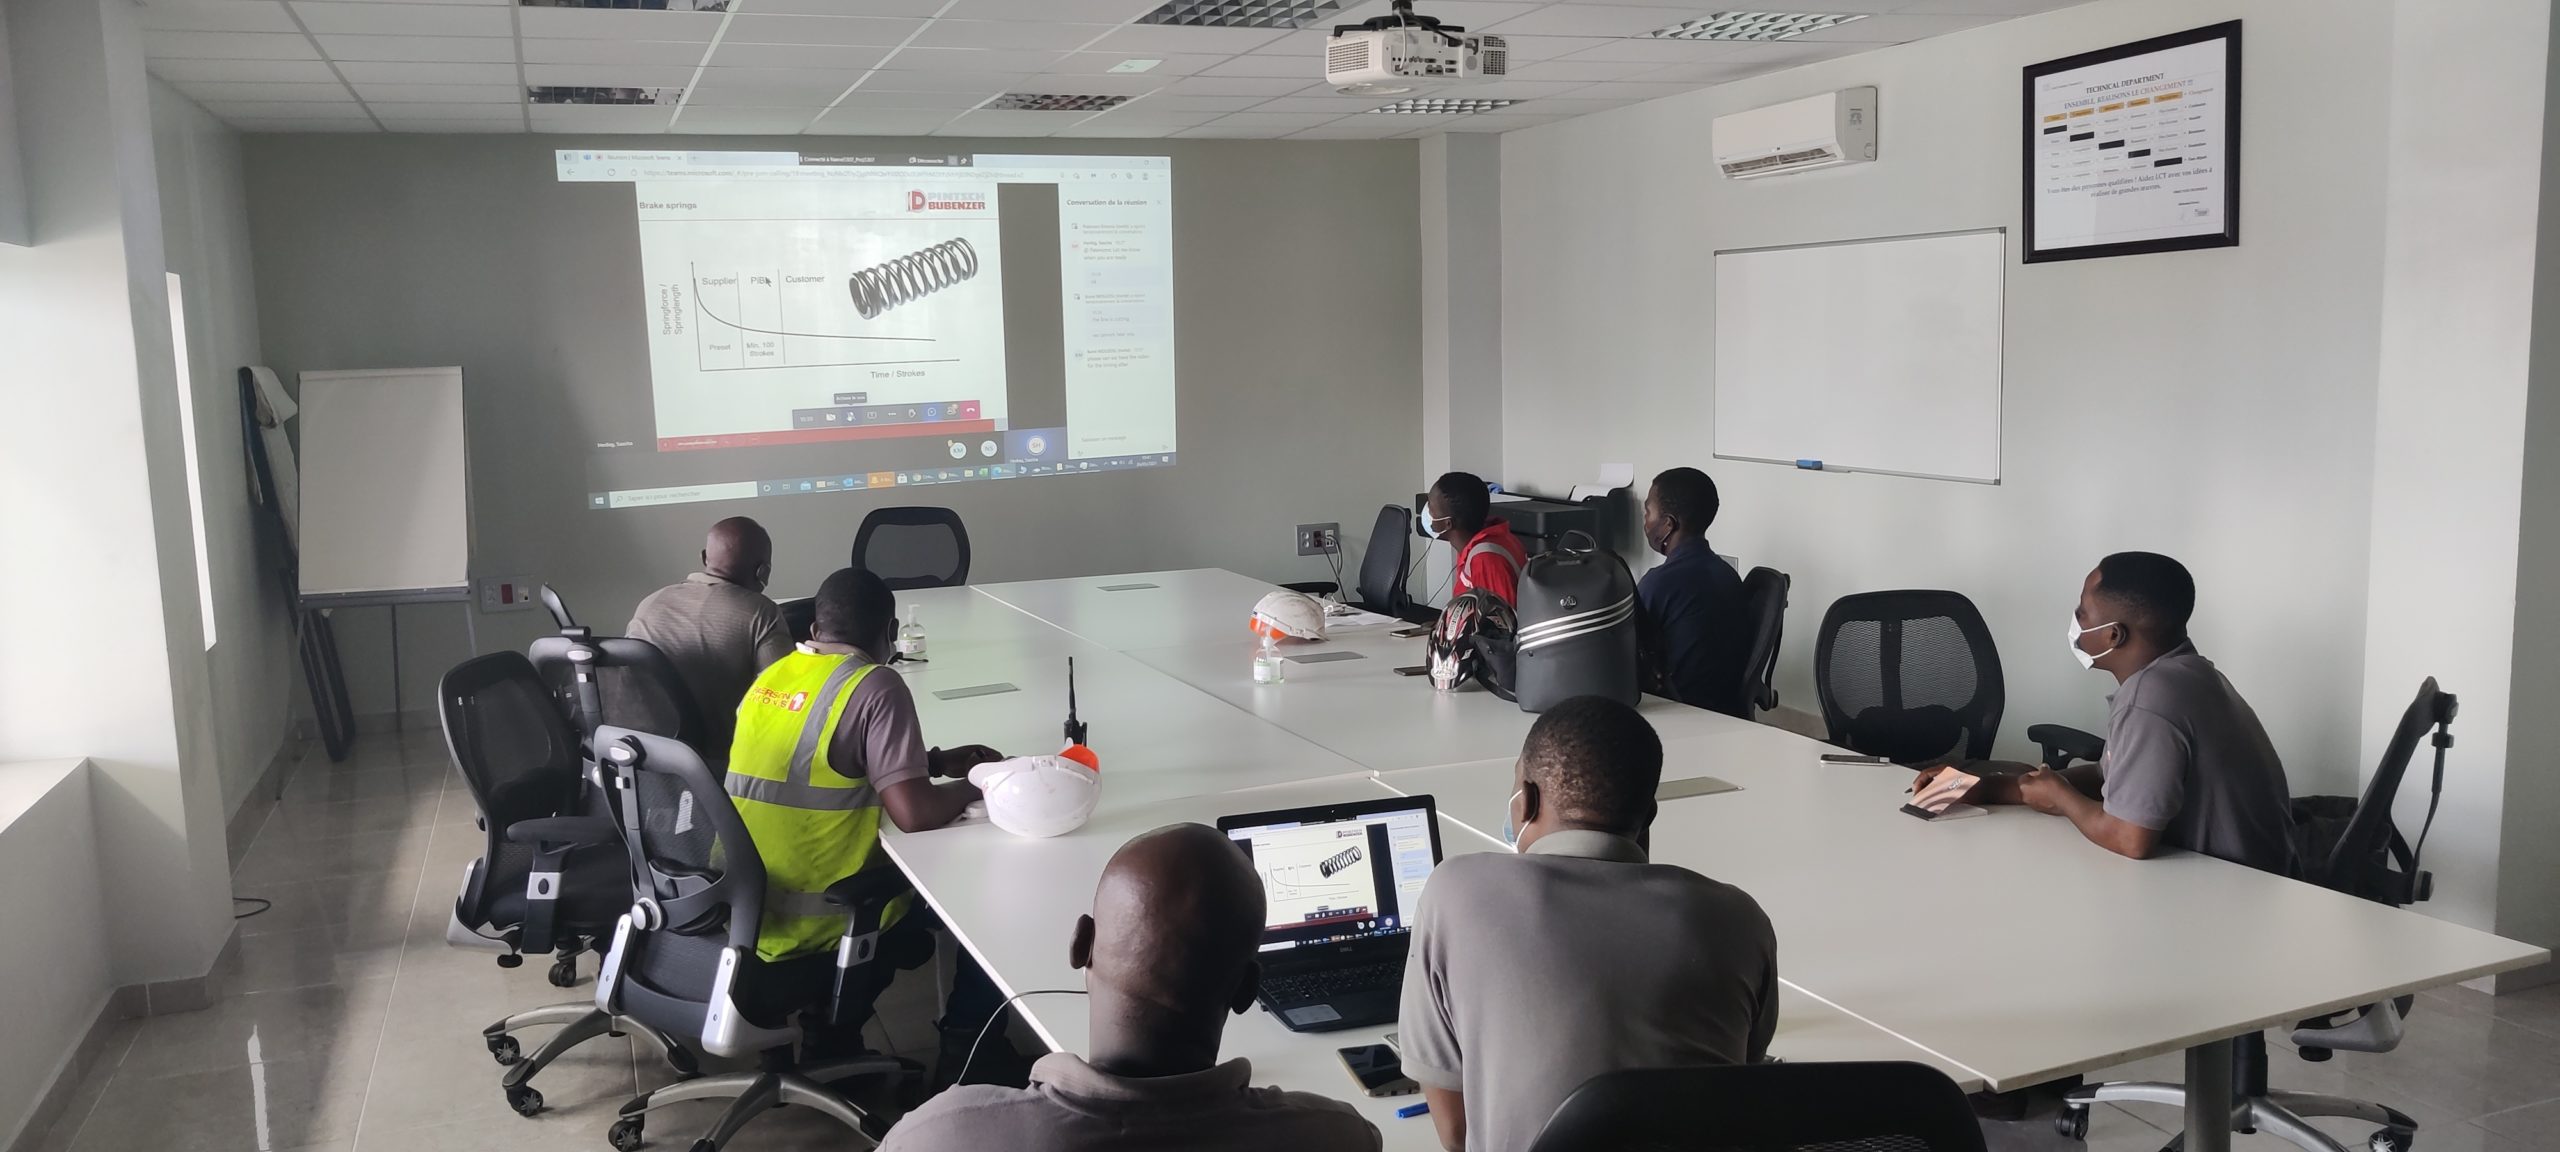 PATERSON SIMONS, TOGETHER WITH PINTSCH BUBENZER, EXECUTE A SUCCESSFUL TRAINING SESSION FOR OUR ENGINEERS AND TECHNICIANS IN TOGO